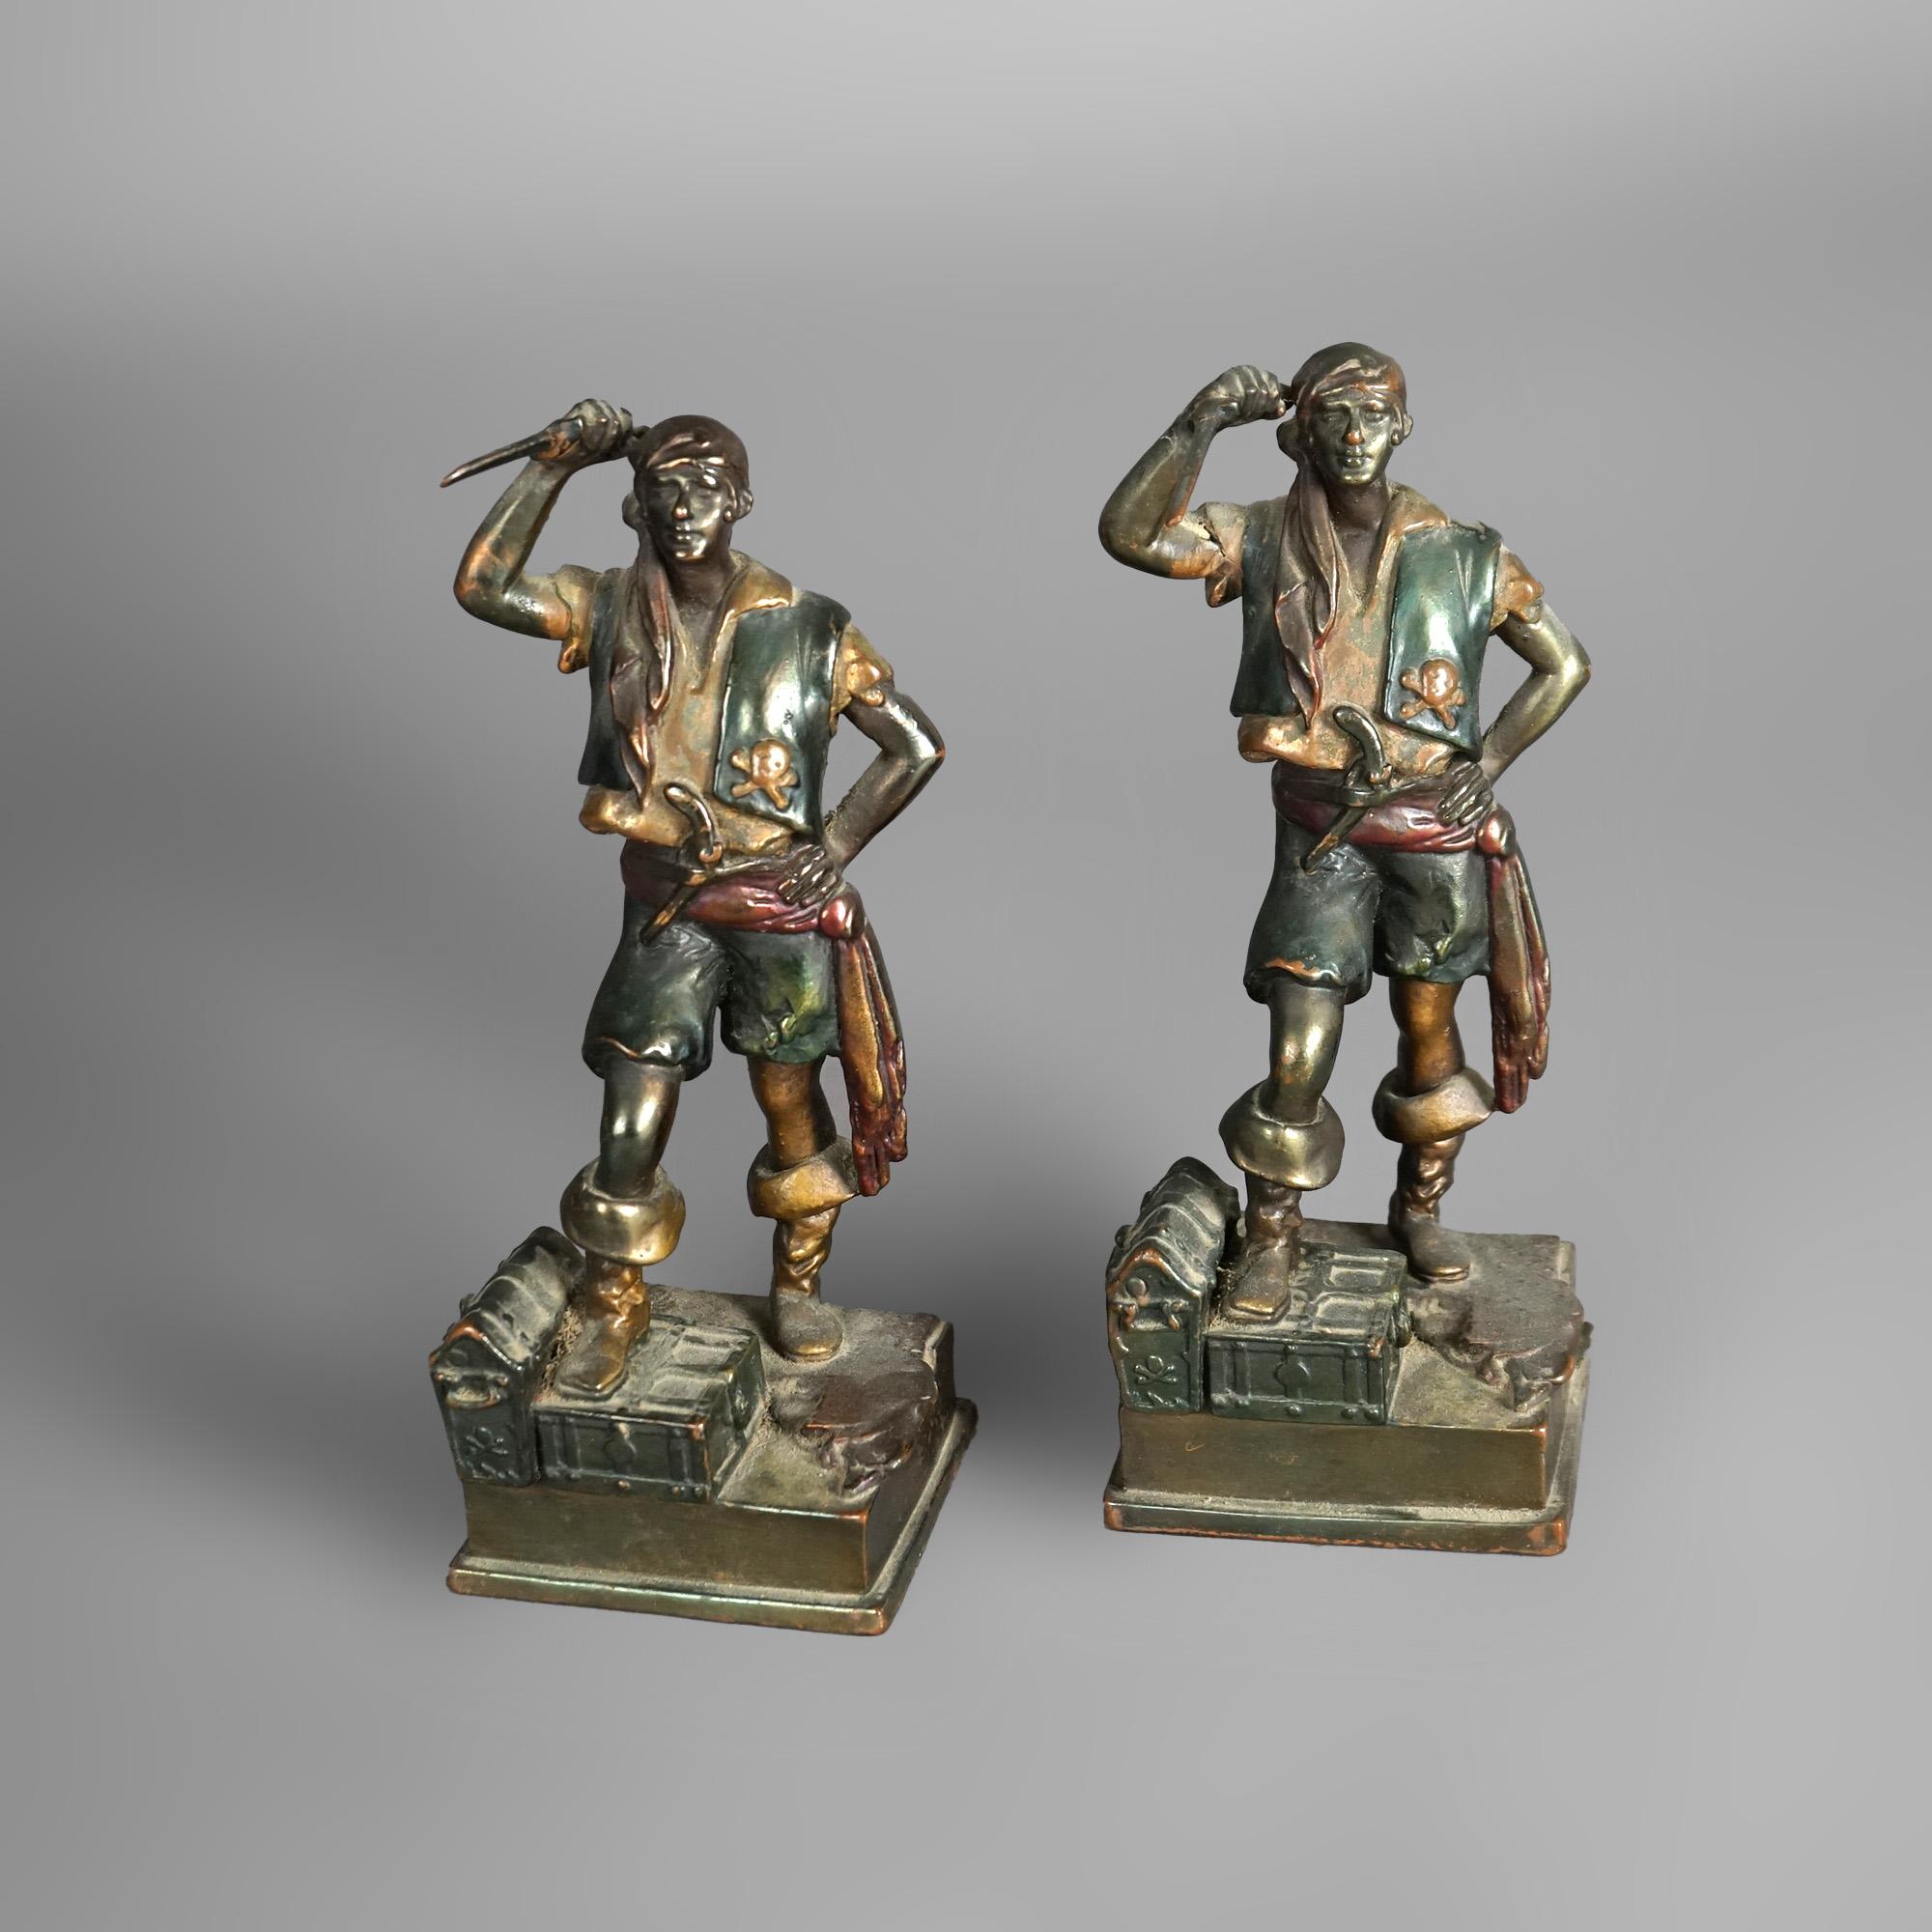 An antique pair of Pompeian figural bookends in the manner of Frankart offer polychromed cast bronze pirates with swords protecting their treasure chests, c1920

Measure - 9.25